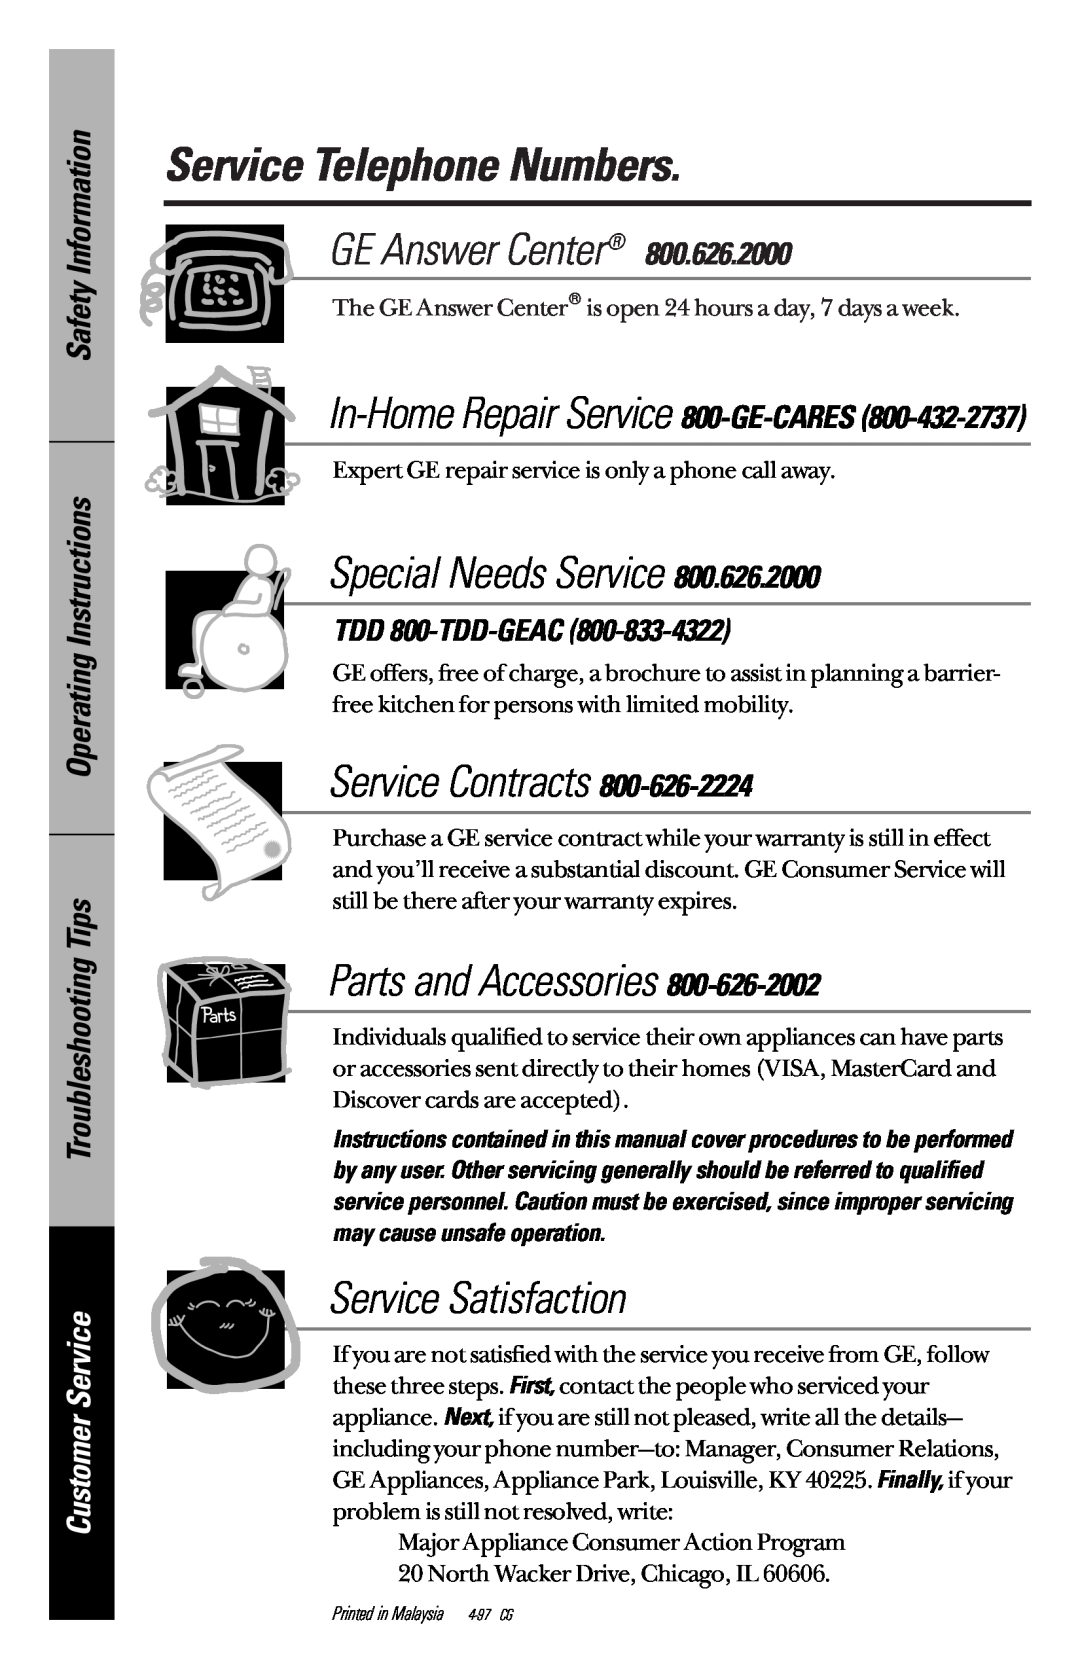 GE JES733 owner manual Service Telephone Numbers, In-Home Repair Service 800-GE-CARES, TDD 800-TDD-GEAC, GE Answer Center 